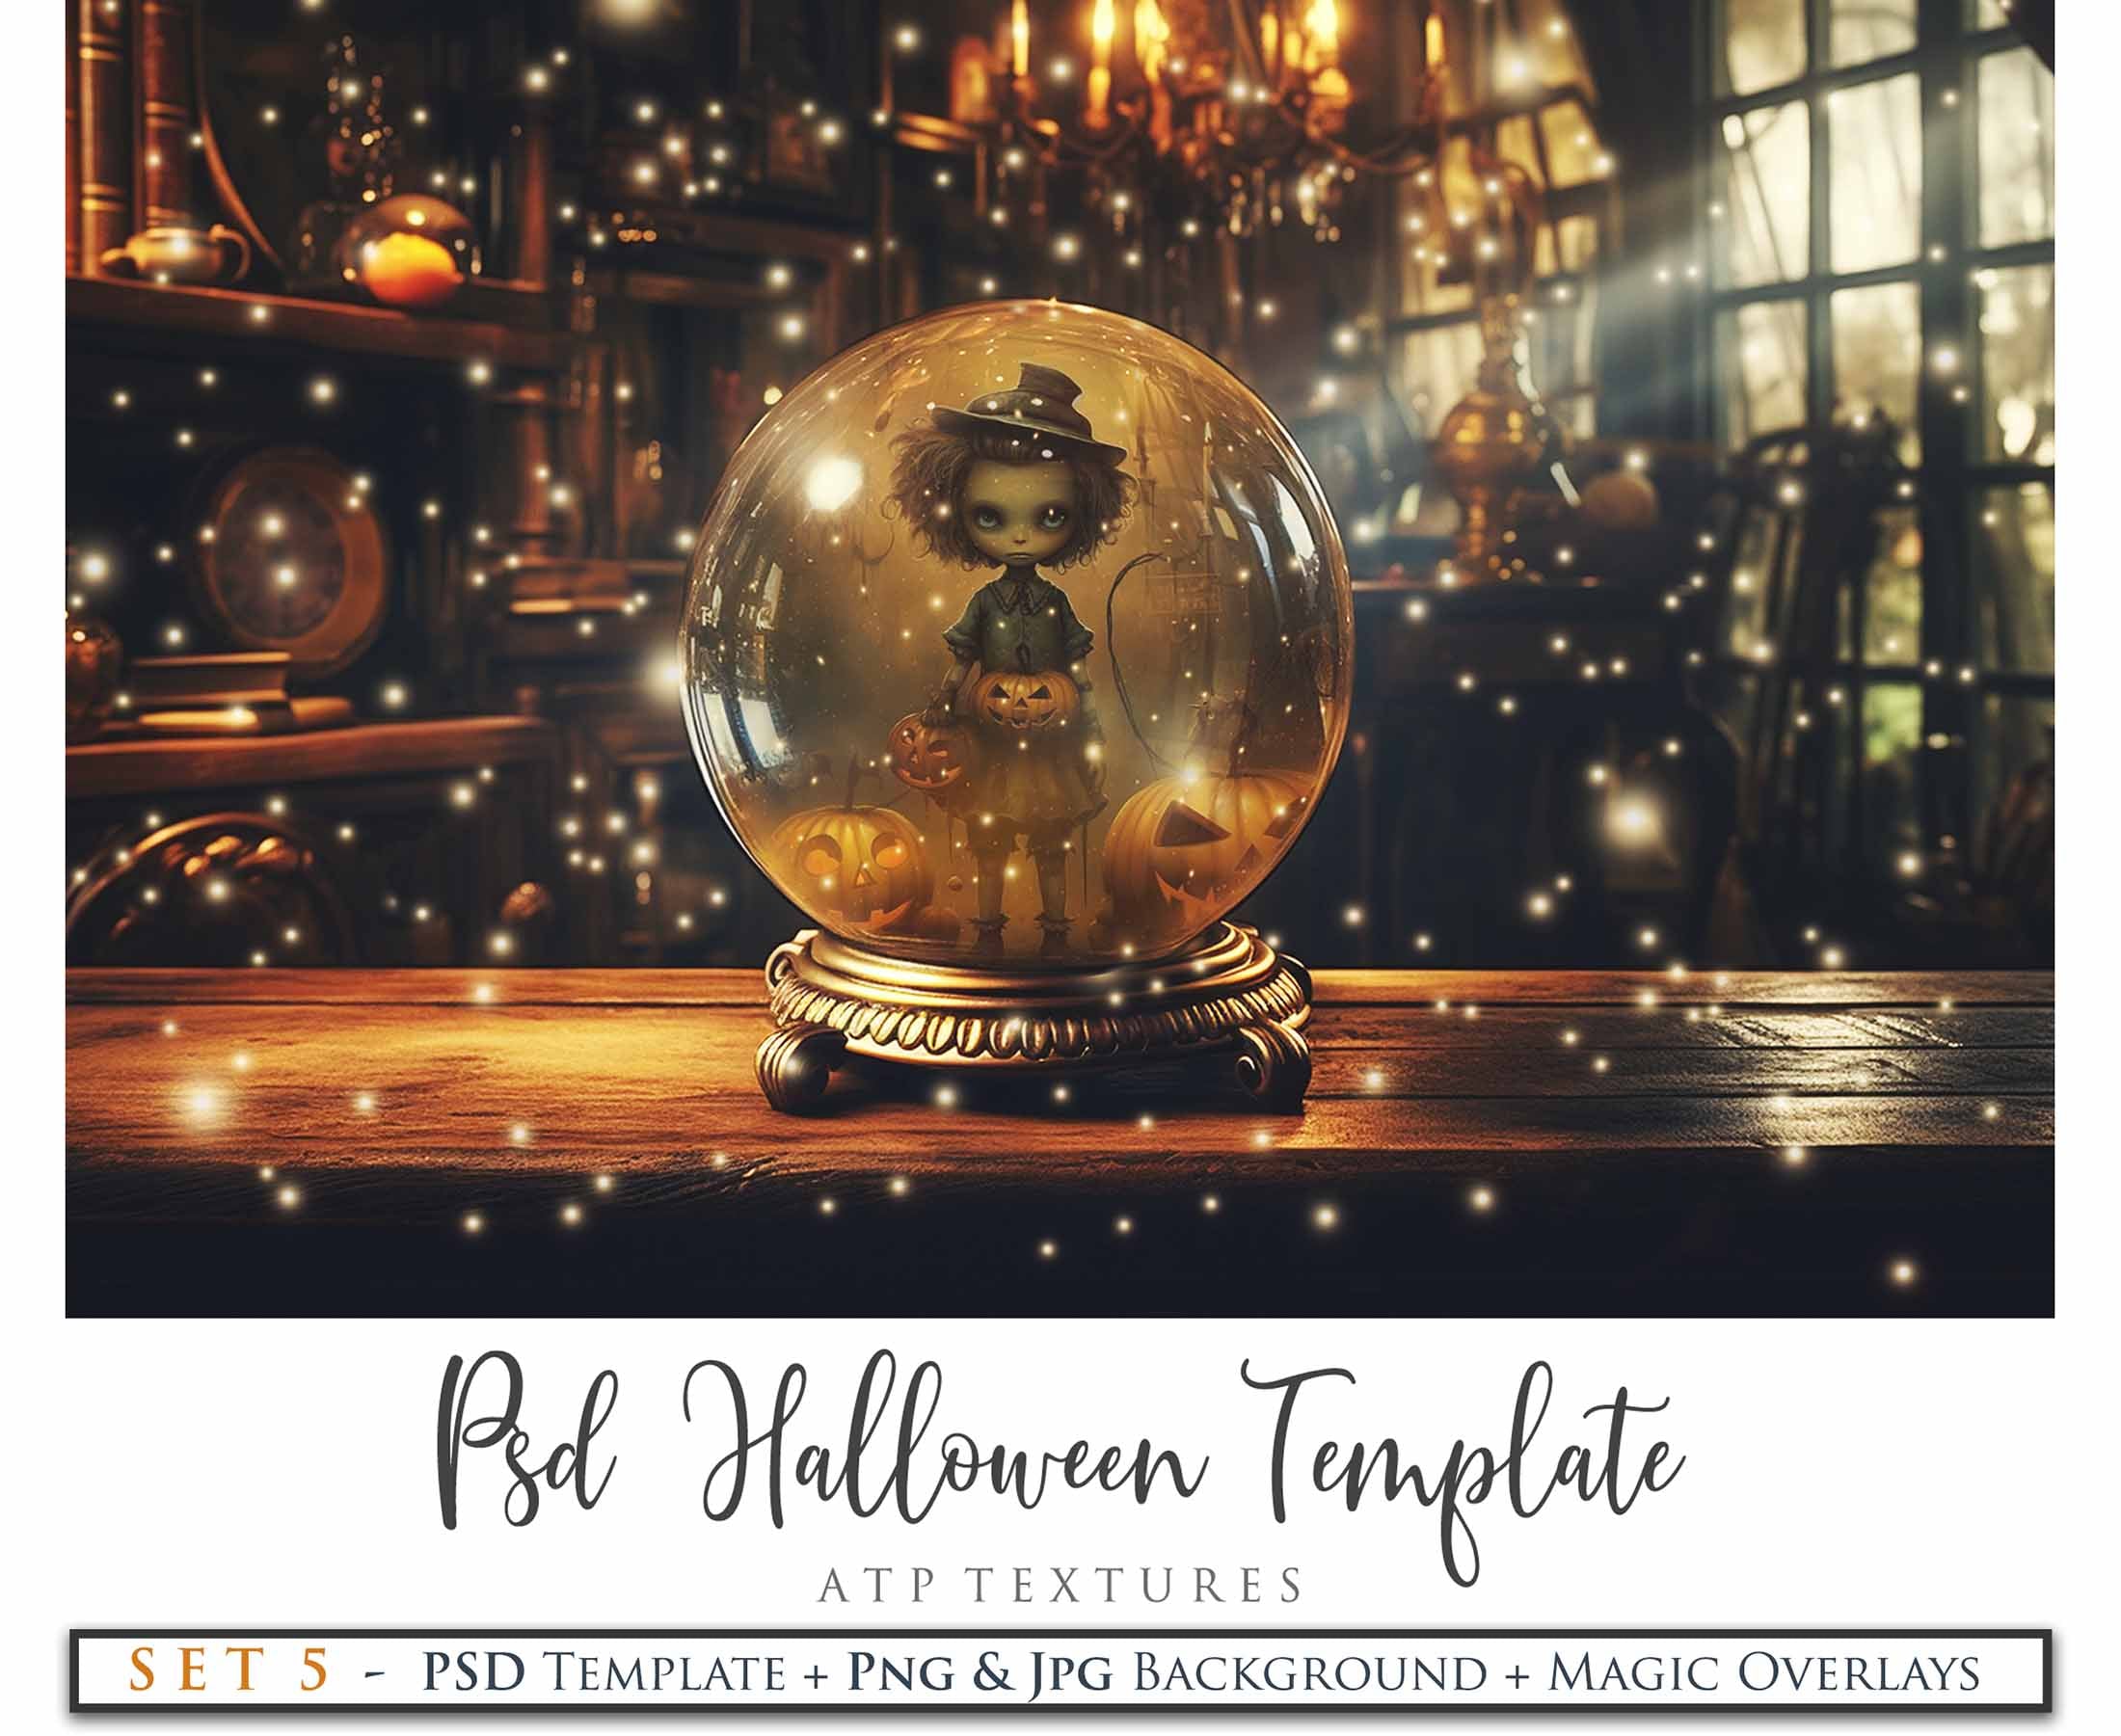 Magical Halloween Template Background. Snow globe with overlays. Add a photo to the digital background. Glass Effect Ornament bauble. Jpeg and Png copies. With magic overlays included. High resolution, quality files for photography, scrapbooking. ATP Textures.